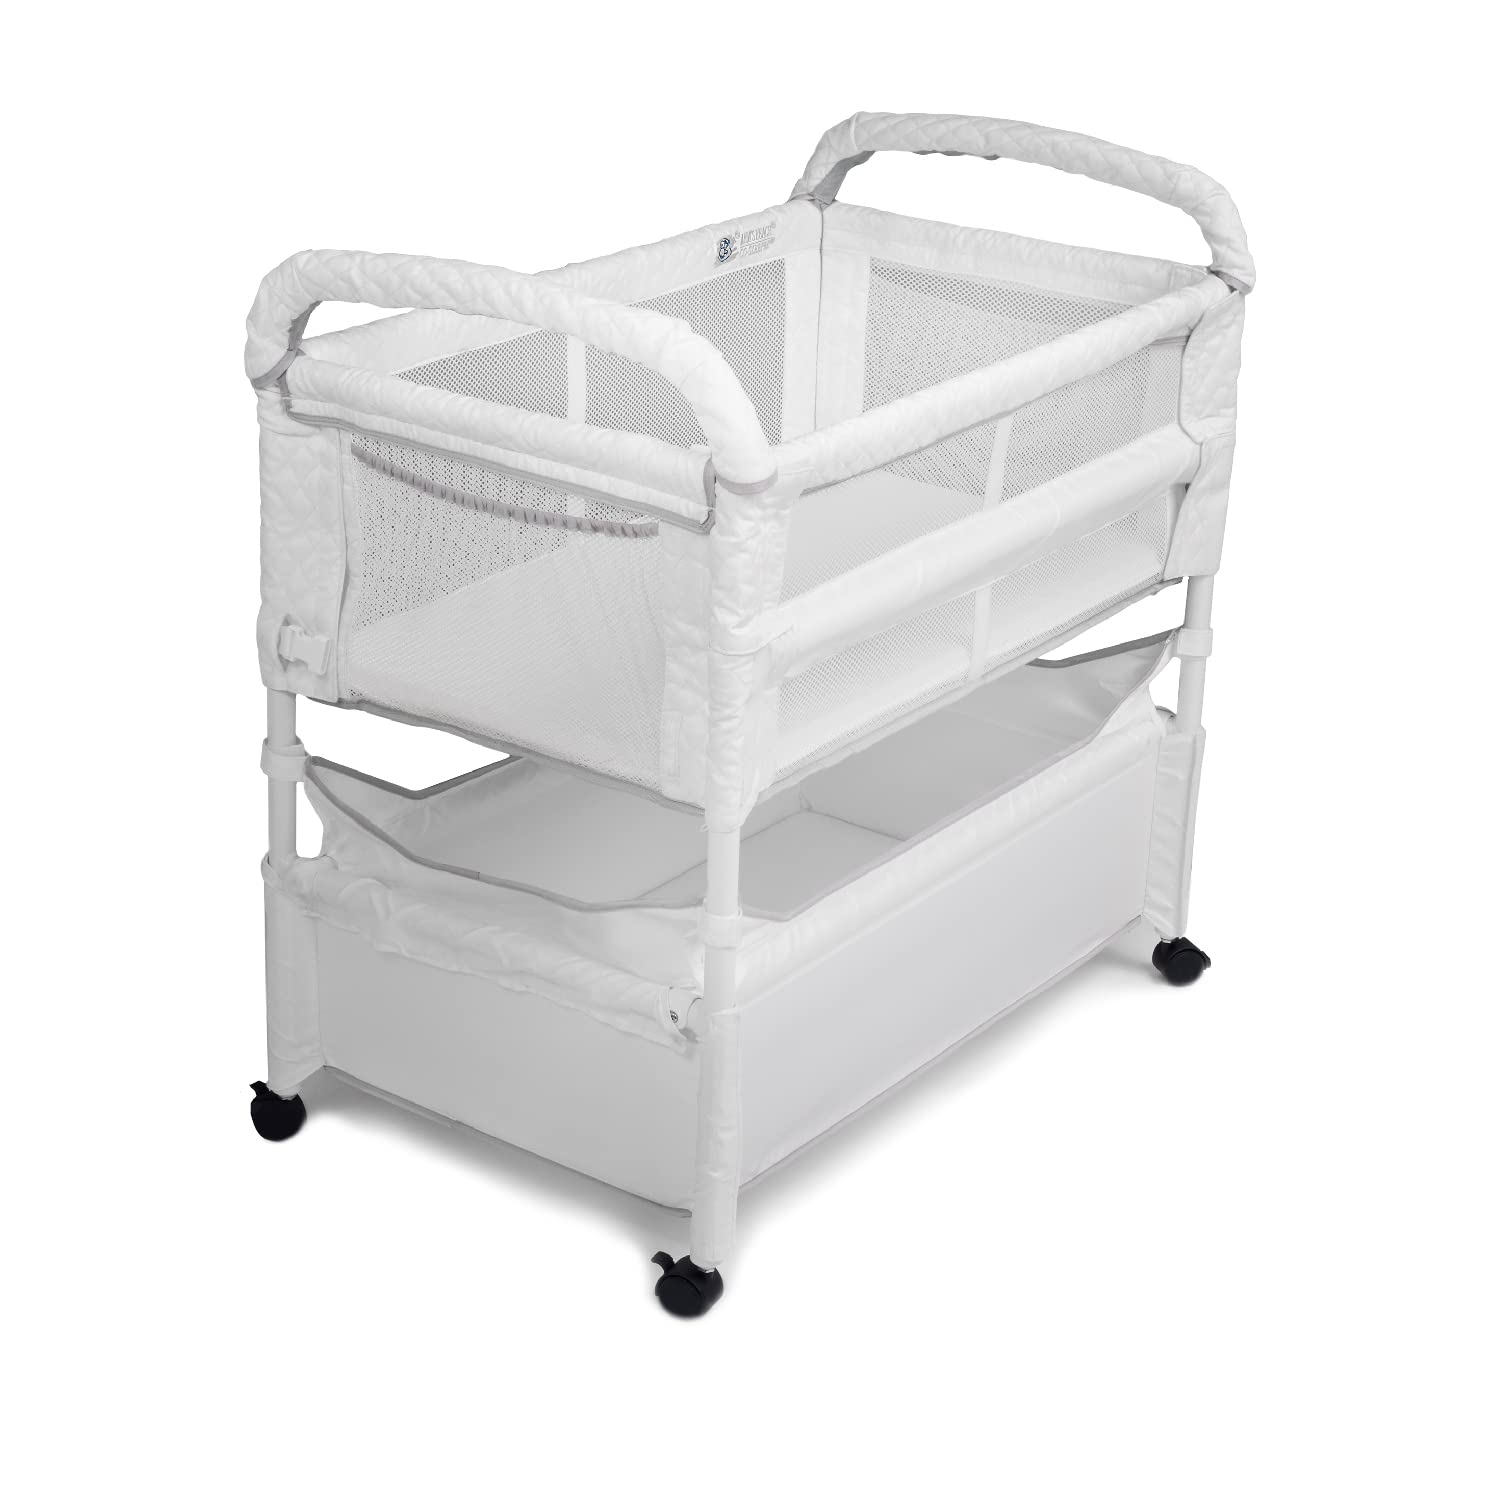 best bassinet for baby, arm's reach clear view bassinet